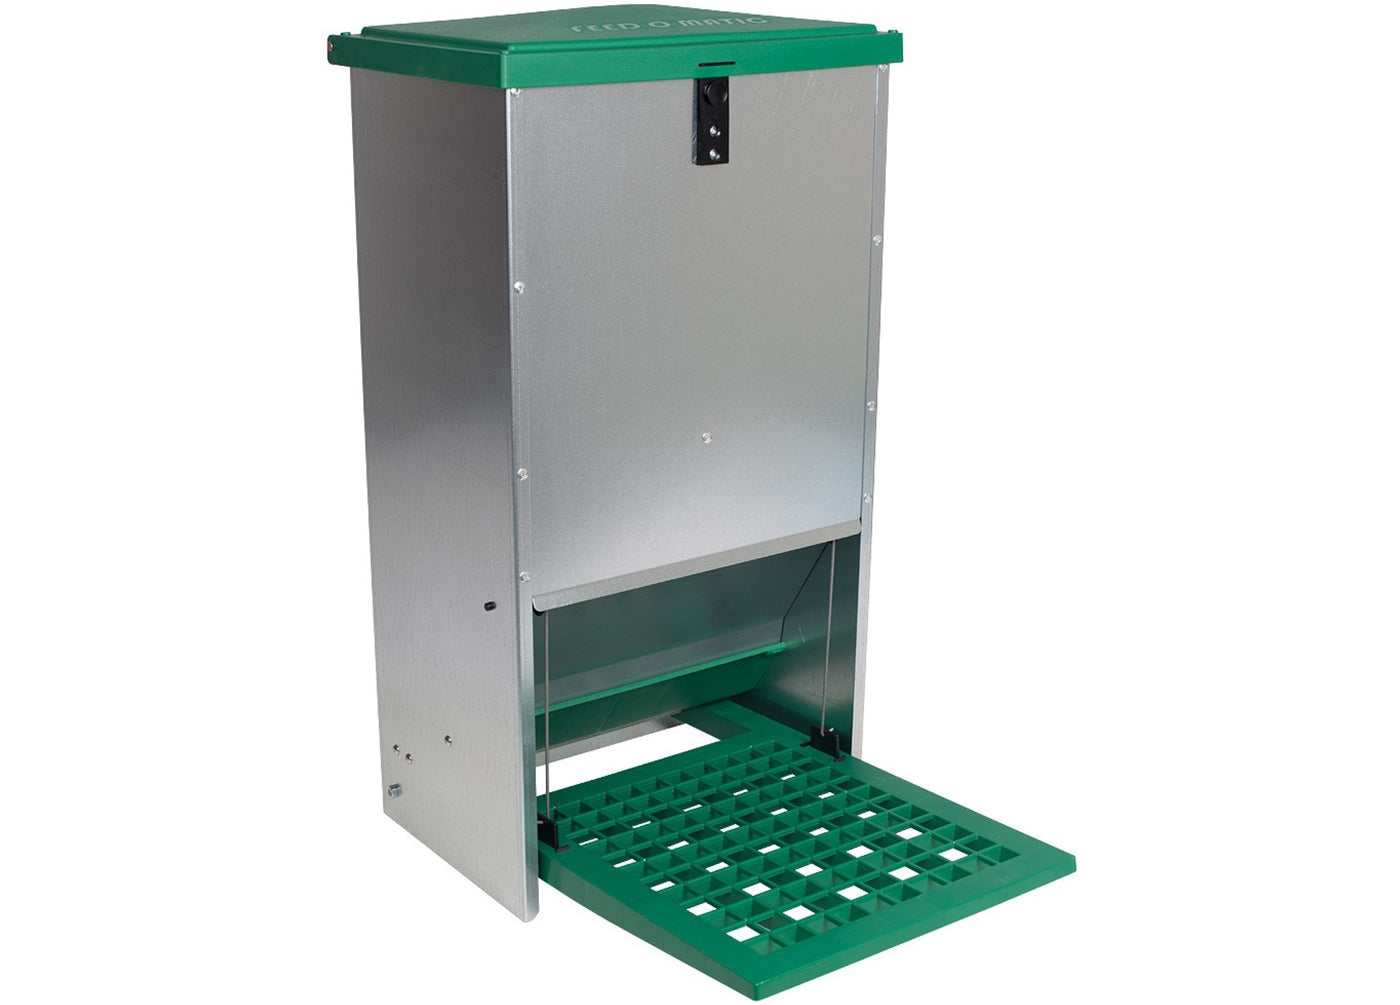 Feedomatic - Poultry Treadle Feeders - Buy Online SPR Centre UK